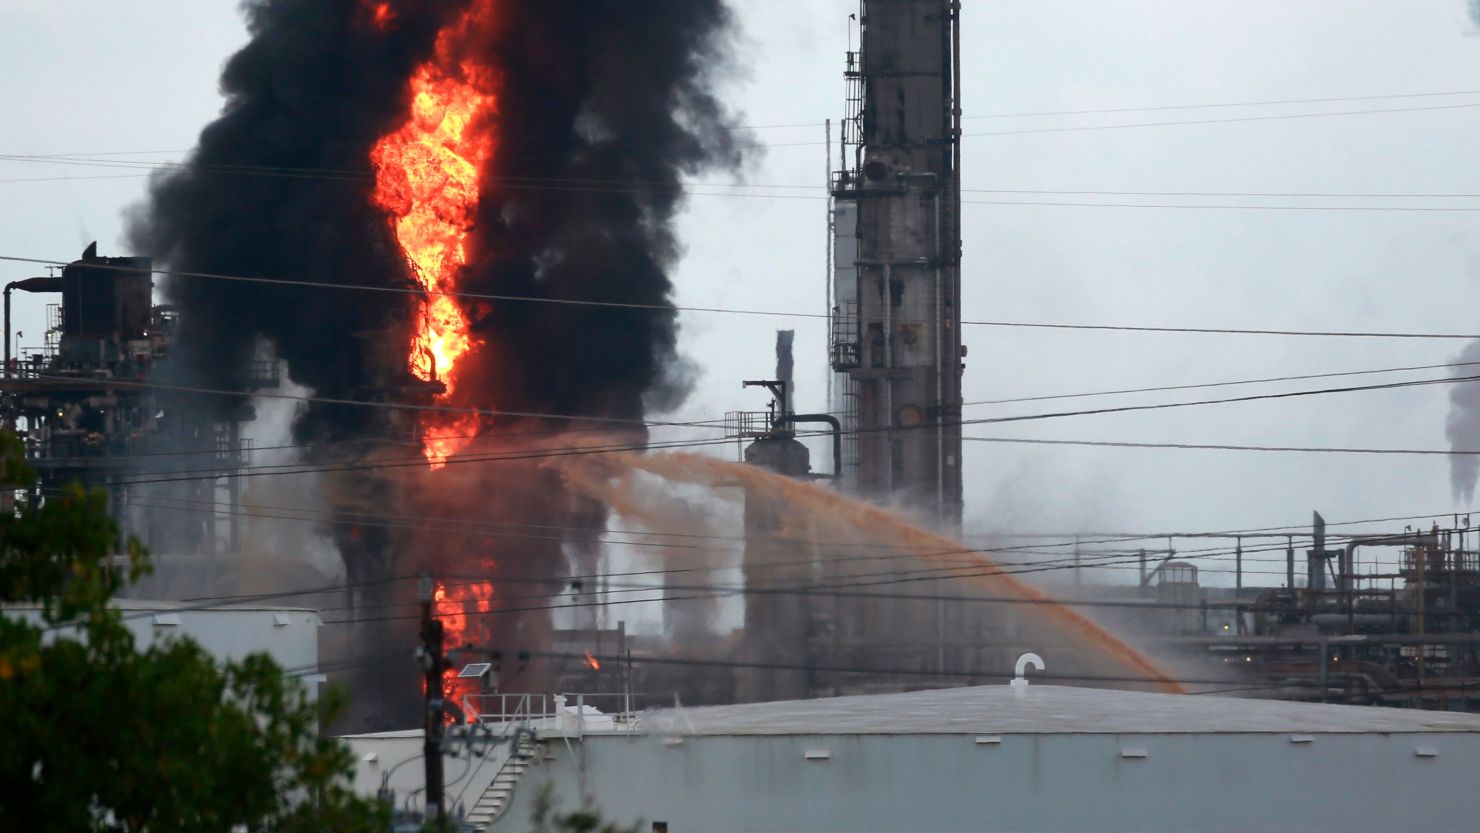 Residents were urged to shelter in place after a fire at ExxonMobil's plant in Baytown, Texas.